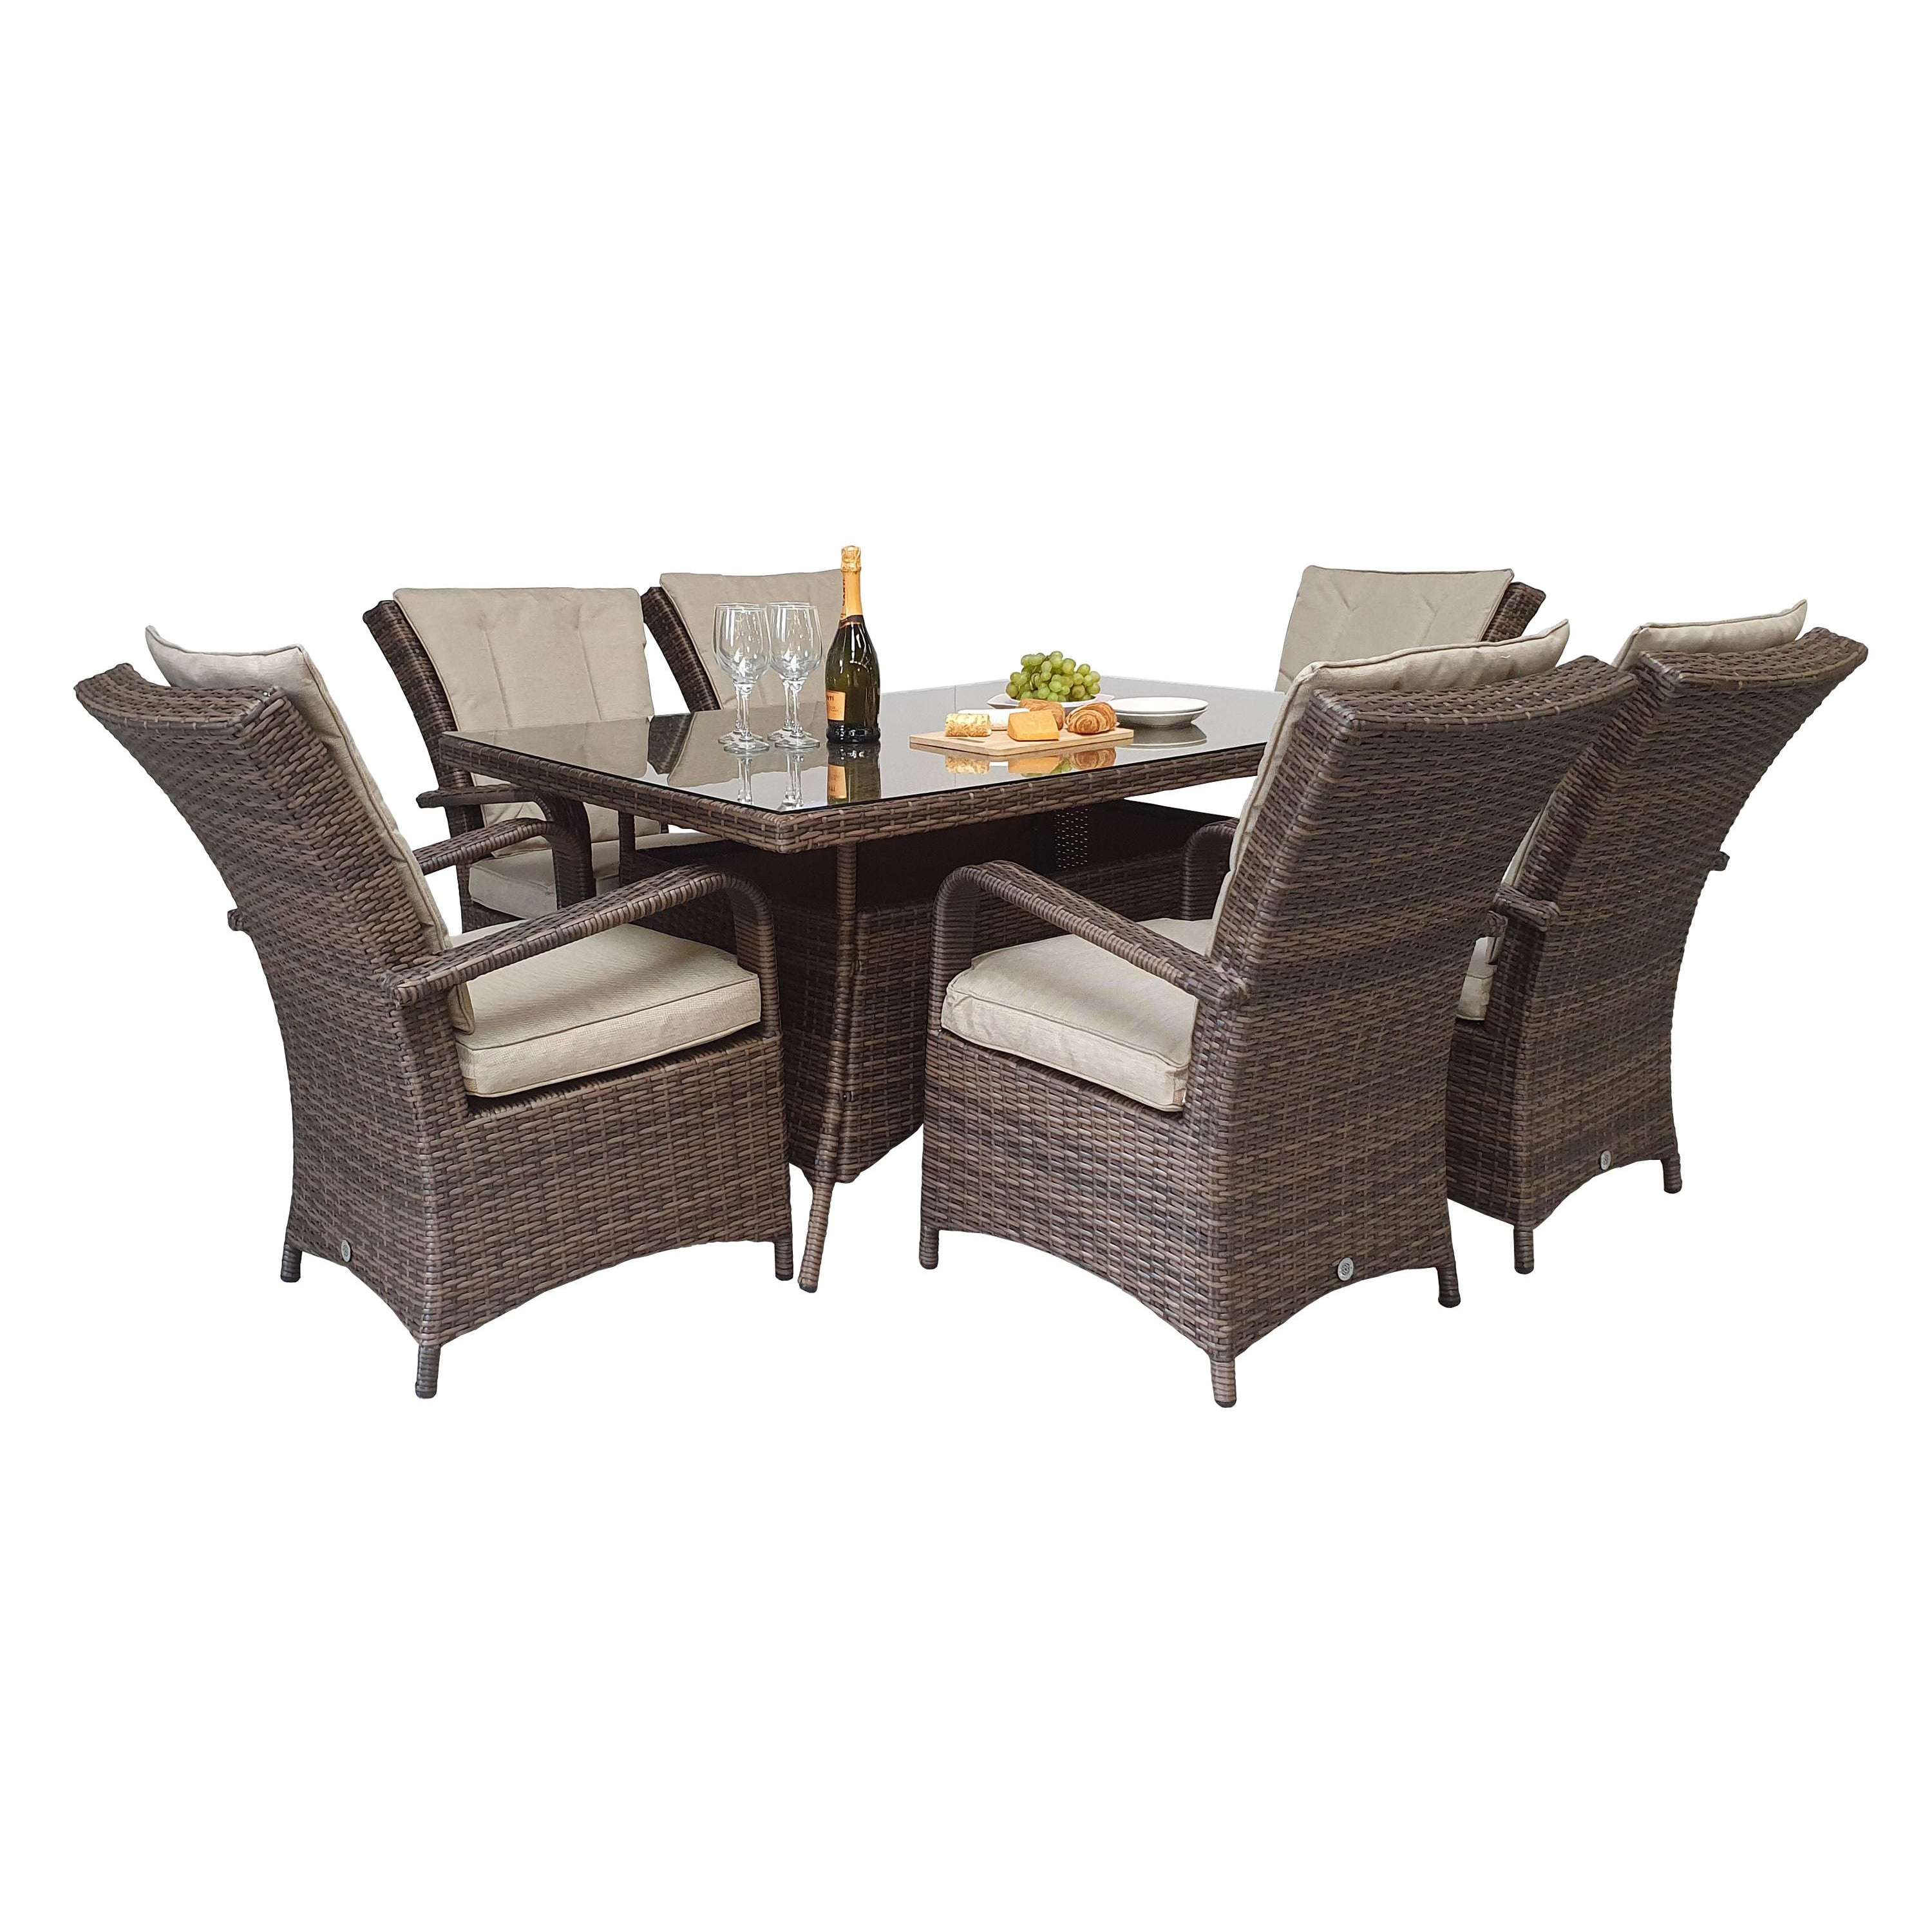 Exceptional Garden:Signature Weave Florence 6-Seater Rectangular Dining Set - Brown